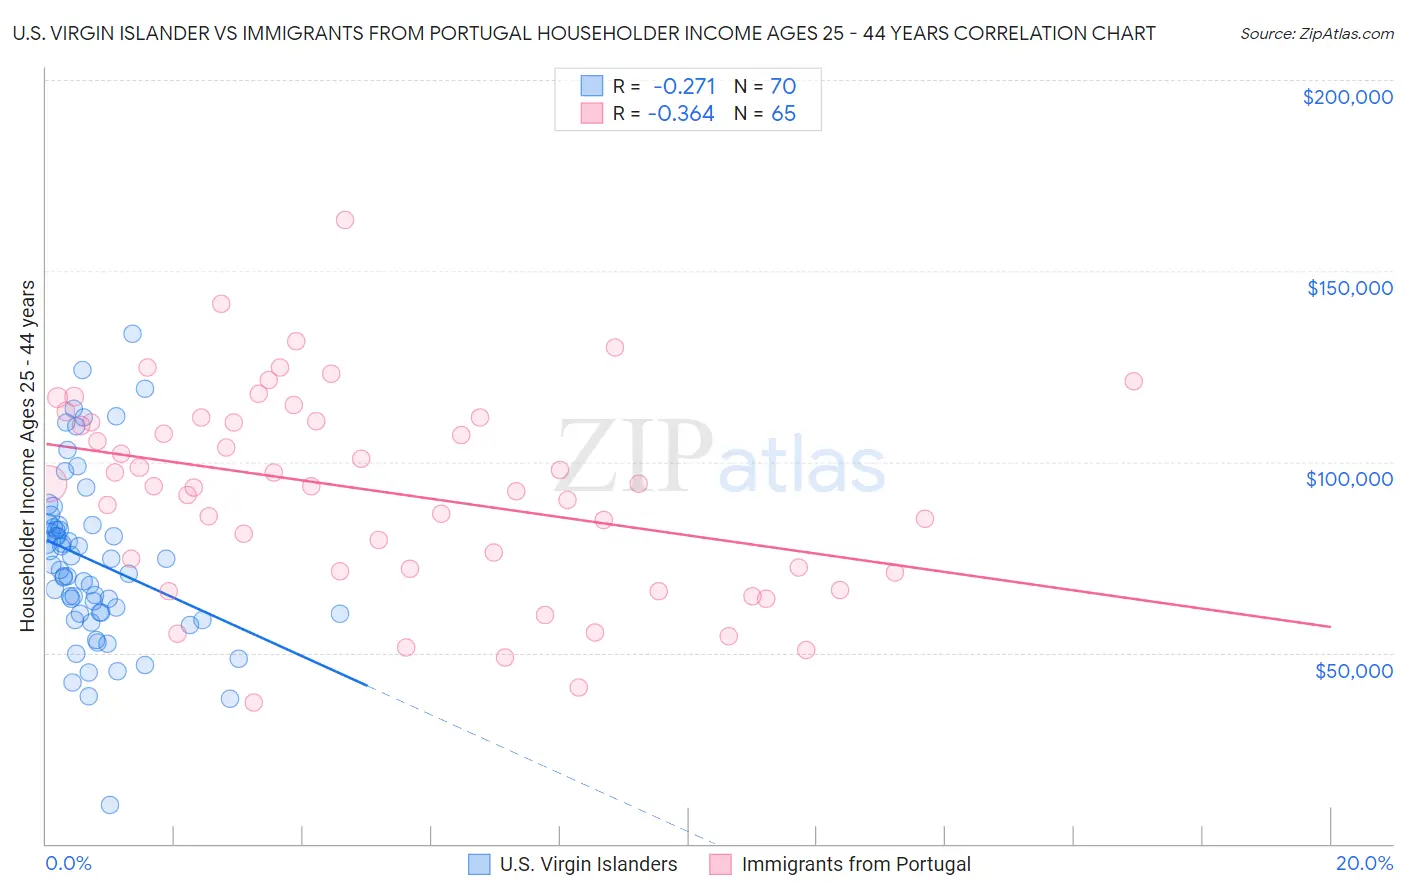 U.S. Virgin Islander vs Immigrants from Portugal Householder Income Ages 25 - 44 years